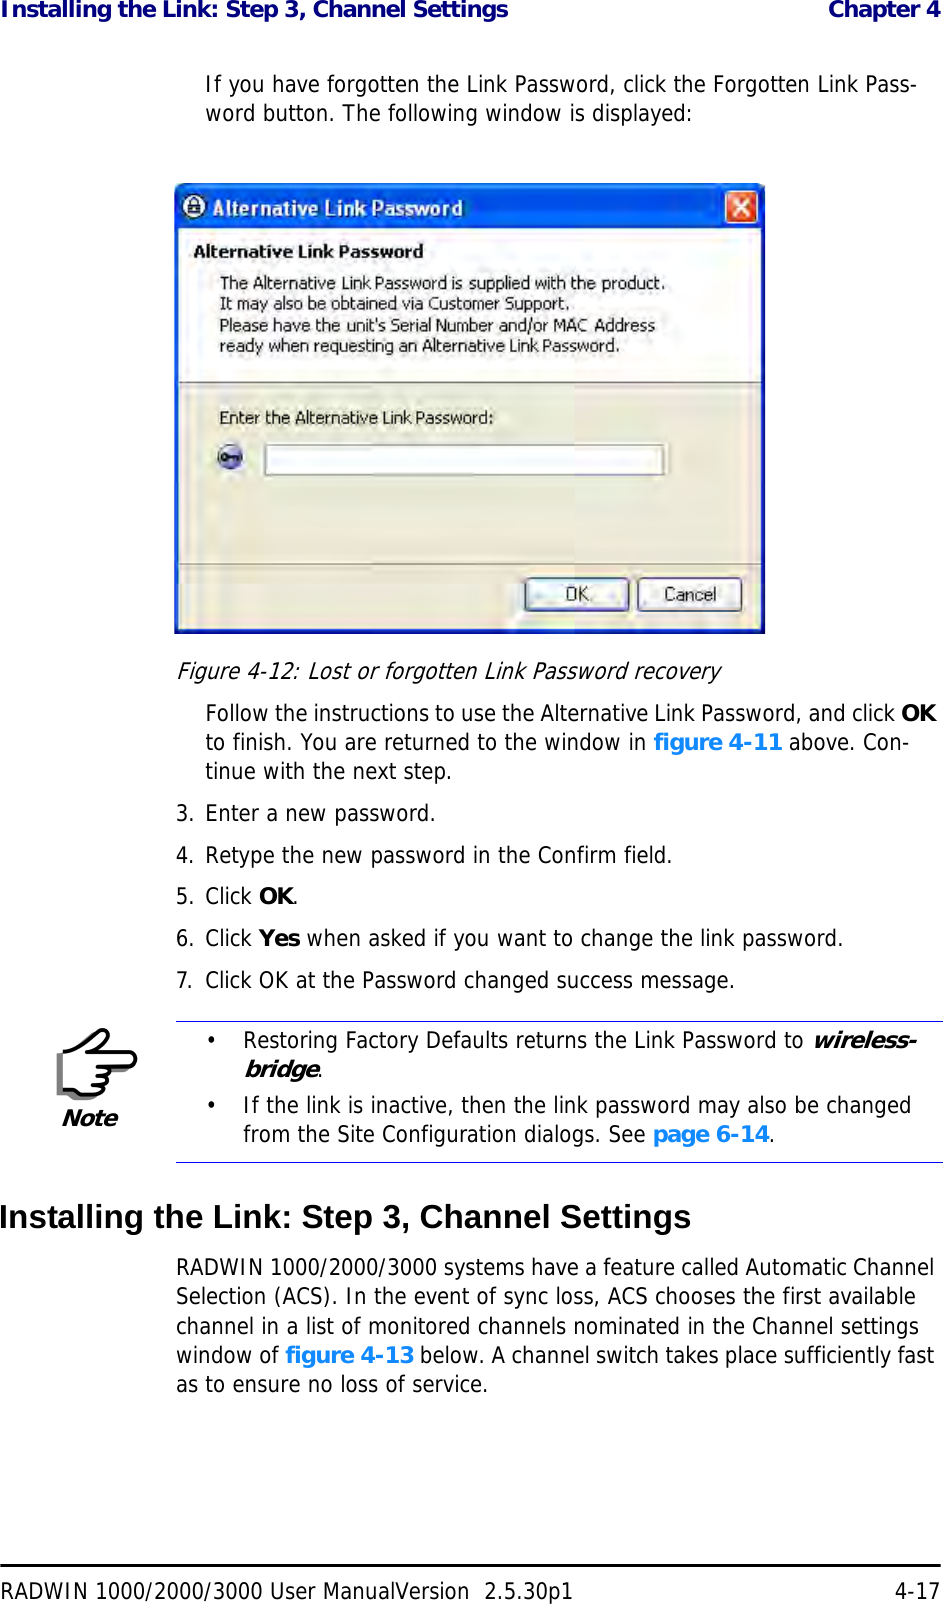 Installing the Link: Step 3, Channel Settings  Chapter 4RADWIN 1000/2000/3000 User ManualVersion  2.5.30p1 4-17If you have forgotten the Link Password, click the Forgotten Link Pass-word button. The following window is displayed:Figure 4-12: Lost or forgotten Link Password recoveryFollow the instructions to use the Alternative Link Password, and click OK to finish. You are returned to the window in figure 4-11 above. Con-tinue with the next step.3. Enter a new password.4. Retype the new password in the Confirm field.5. Click OK.6. Click Yes when asked if you want to change the link password.7. Click OK at the Password changed success message.Installing the Link: Step 3, Channel SettingsRADWIN 1000/2000/3000 systems have a feature called Automatic Channel Selection (ACS). In the event of sync loss, ACS chooses the first available channel in a list of monitored channels nominated in the Channel settings window of figure 4-13 below. A channel switch takes place sufficiently fast as to ensure no loss of service.Note• Restoring Factory Defaults returns the Link Password to wireless-bridge.• If the link is inactive, then the link password may also be changed from the Site Configuration dialogs. See page 6-14.